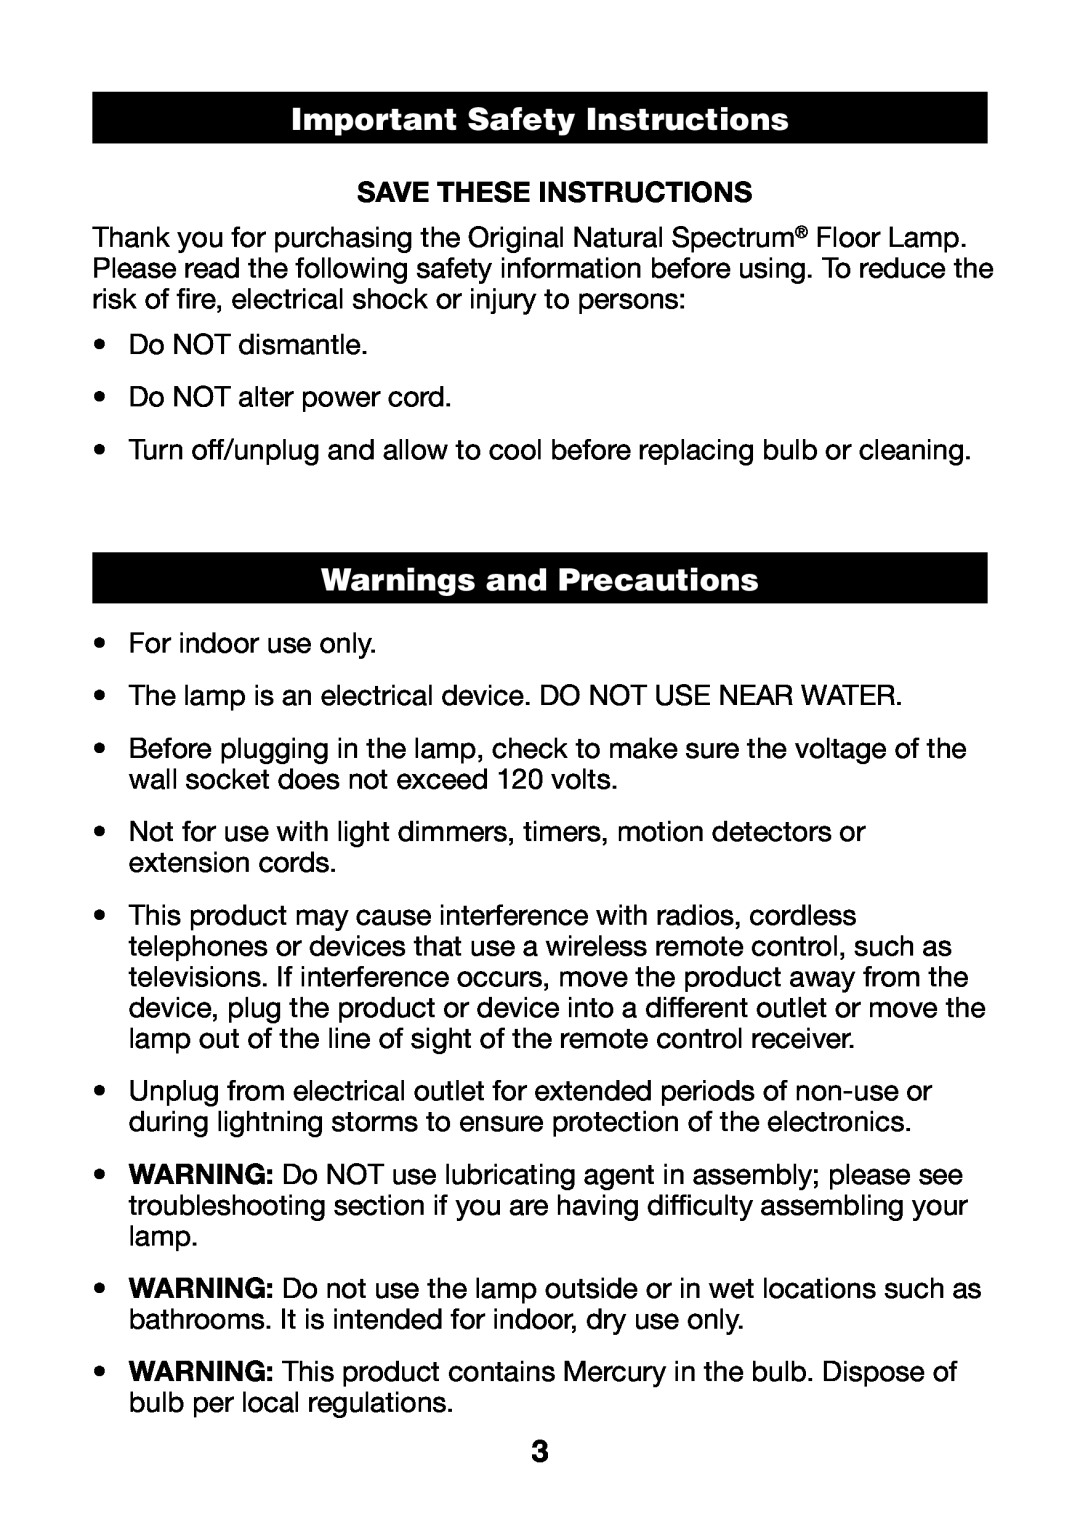 Verilux VF02 manual Important Safety Instructions, Warnings and Precautions, Save These Instructions 